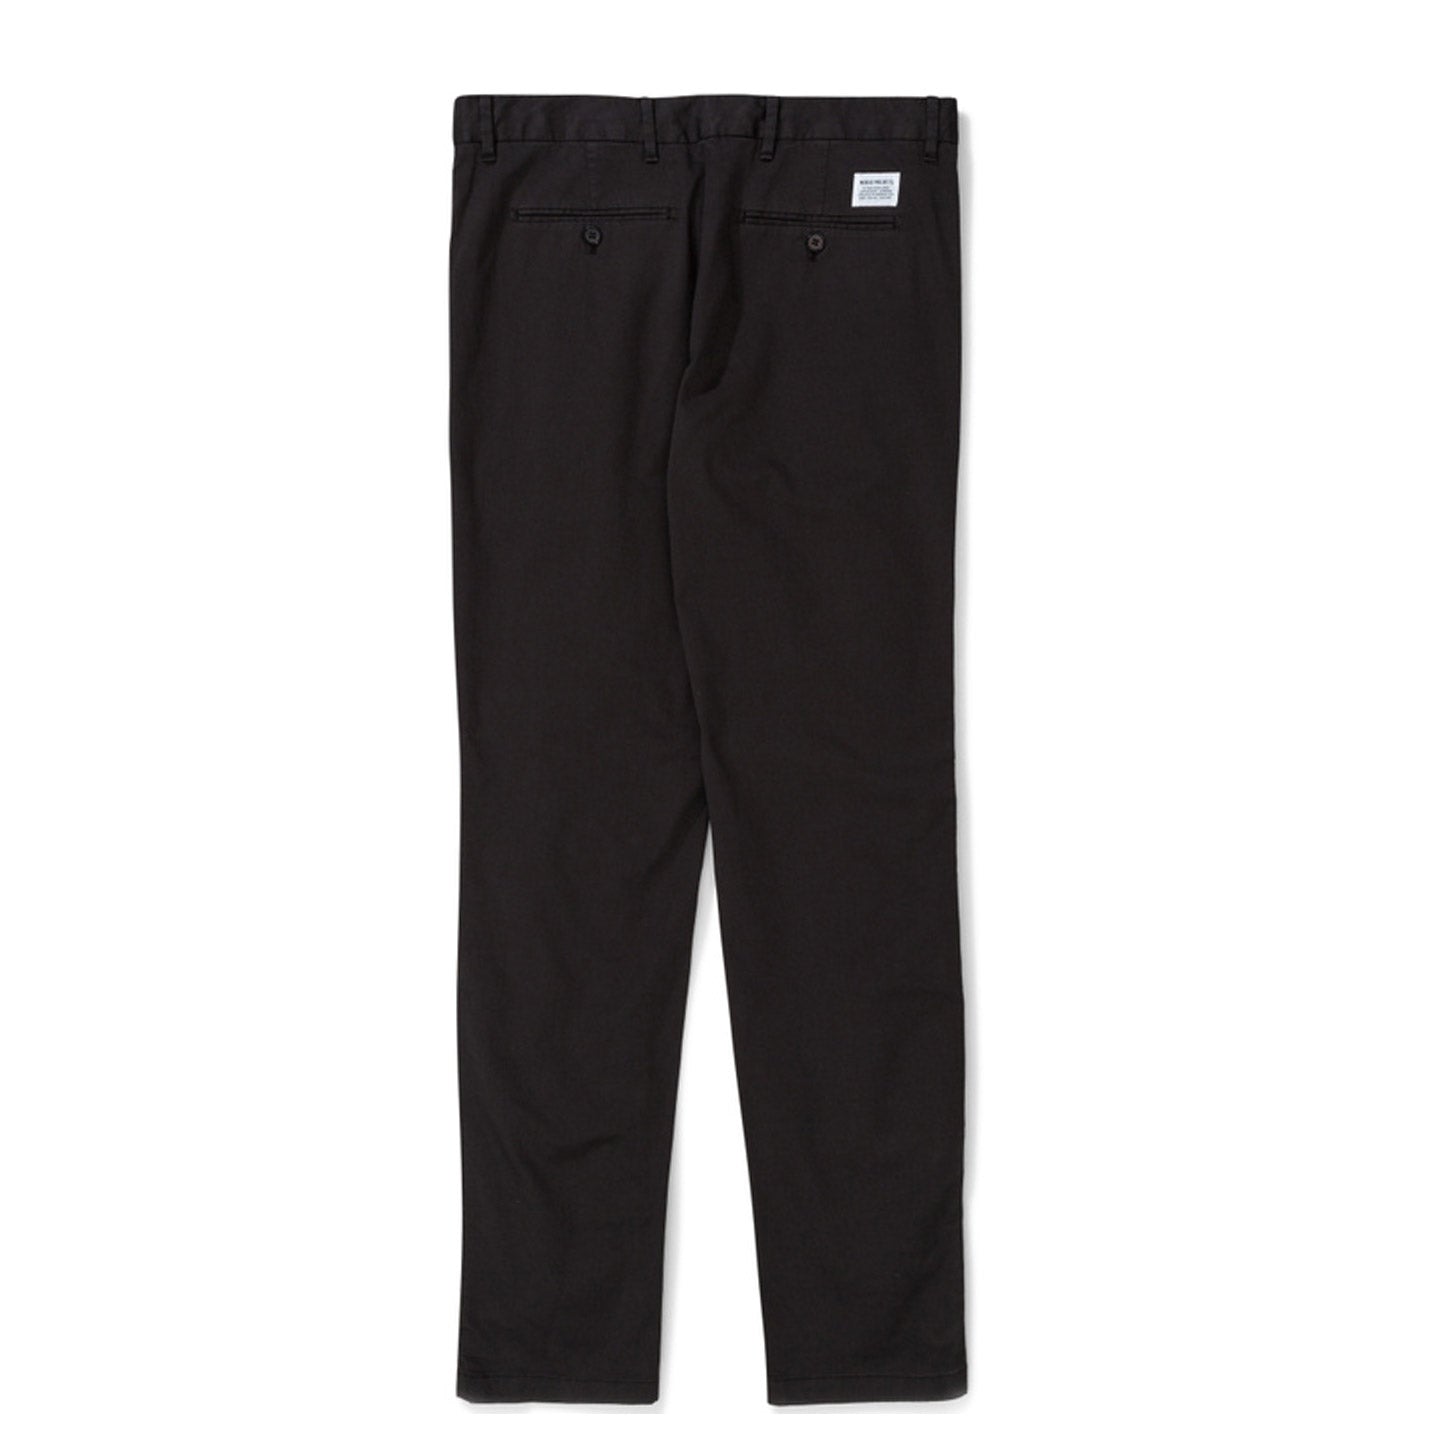 NORSE PROJECTS AROS SLIM LIGHT BLACK